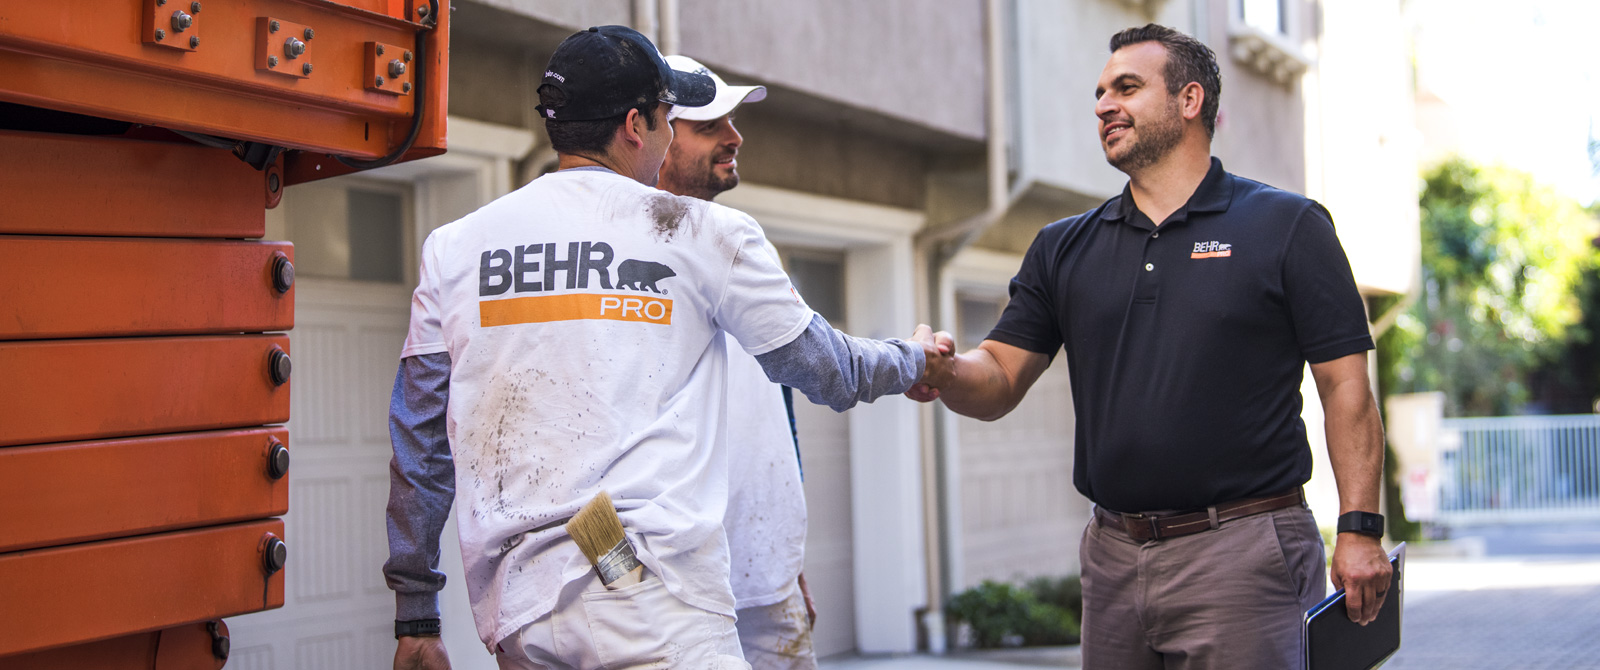 A BEHR PRO Rep shaking hands with on of the 2 Pro Painters. In the background is a multi family condo units.